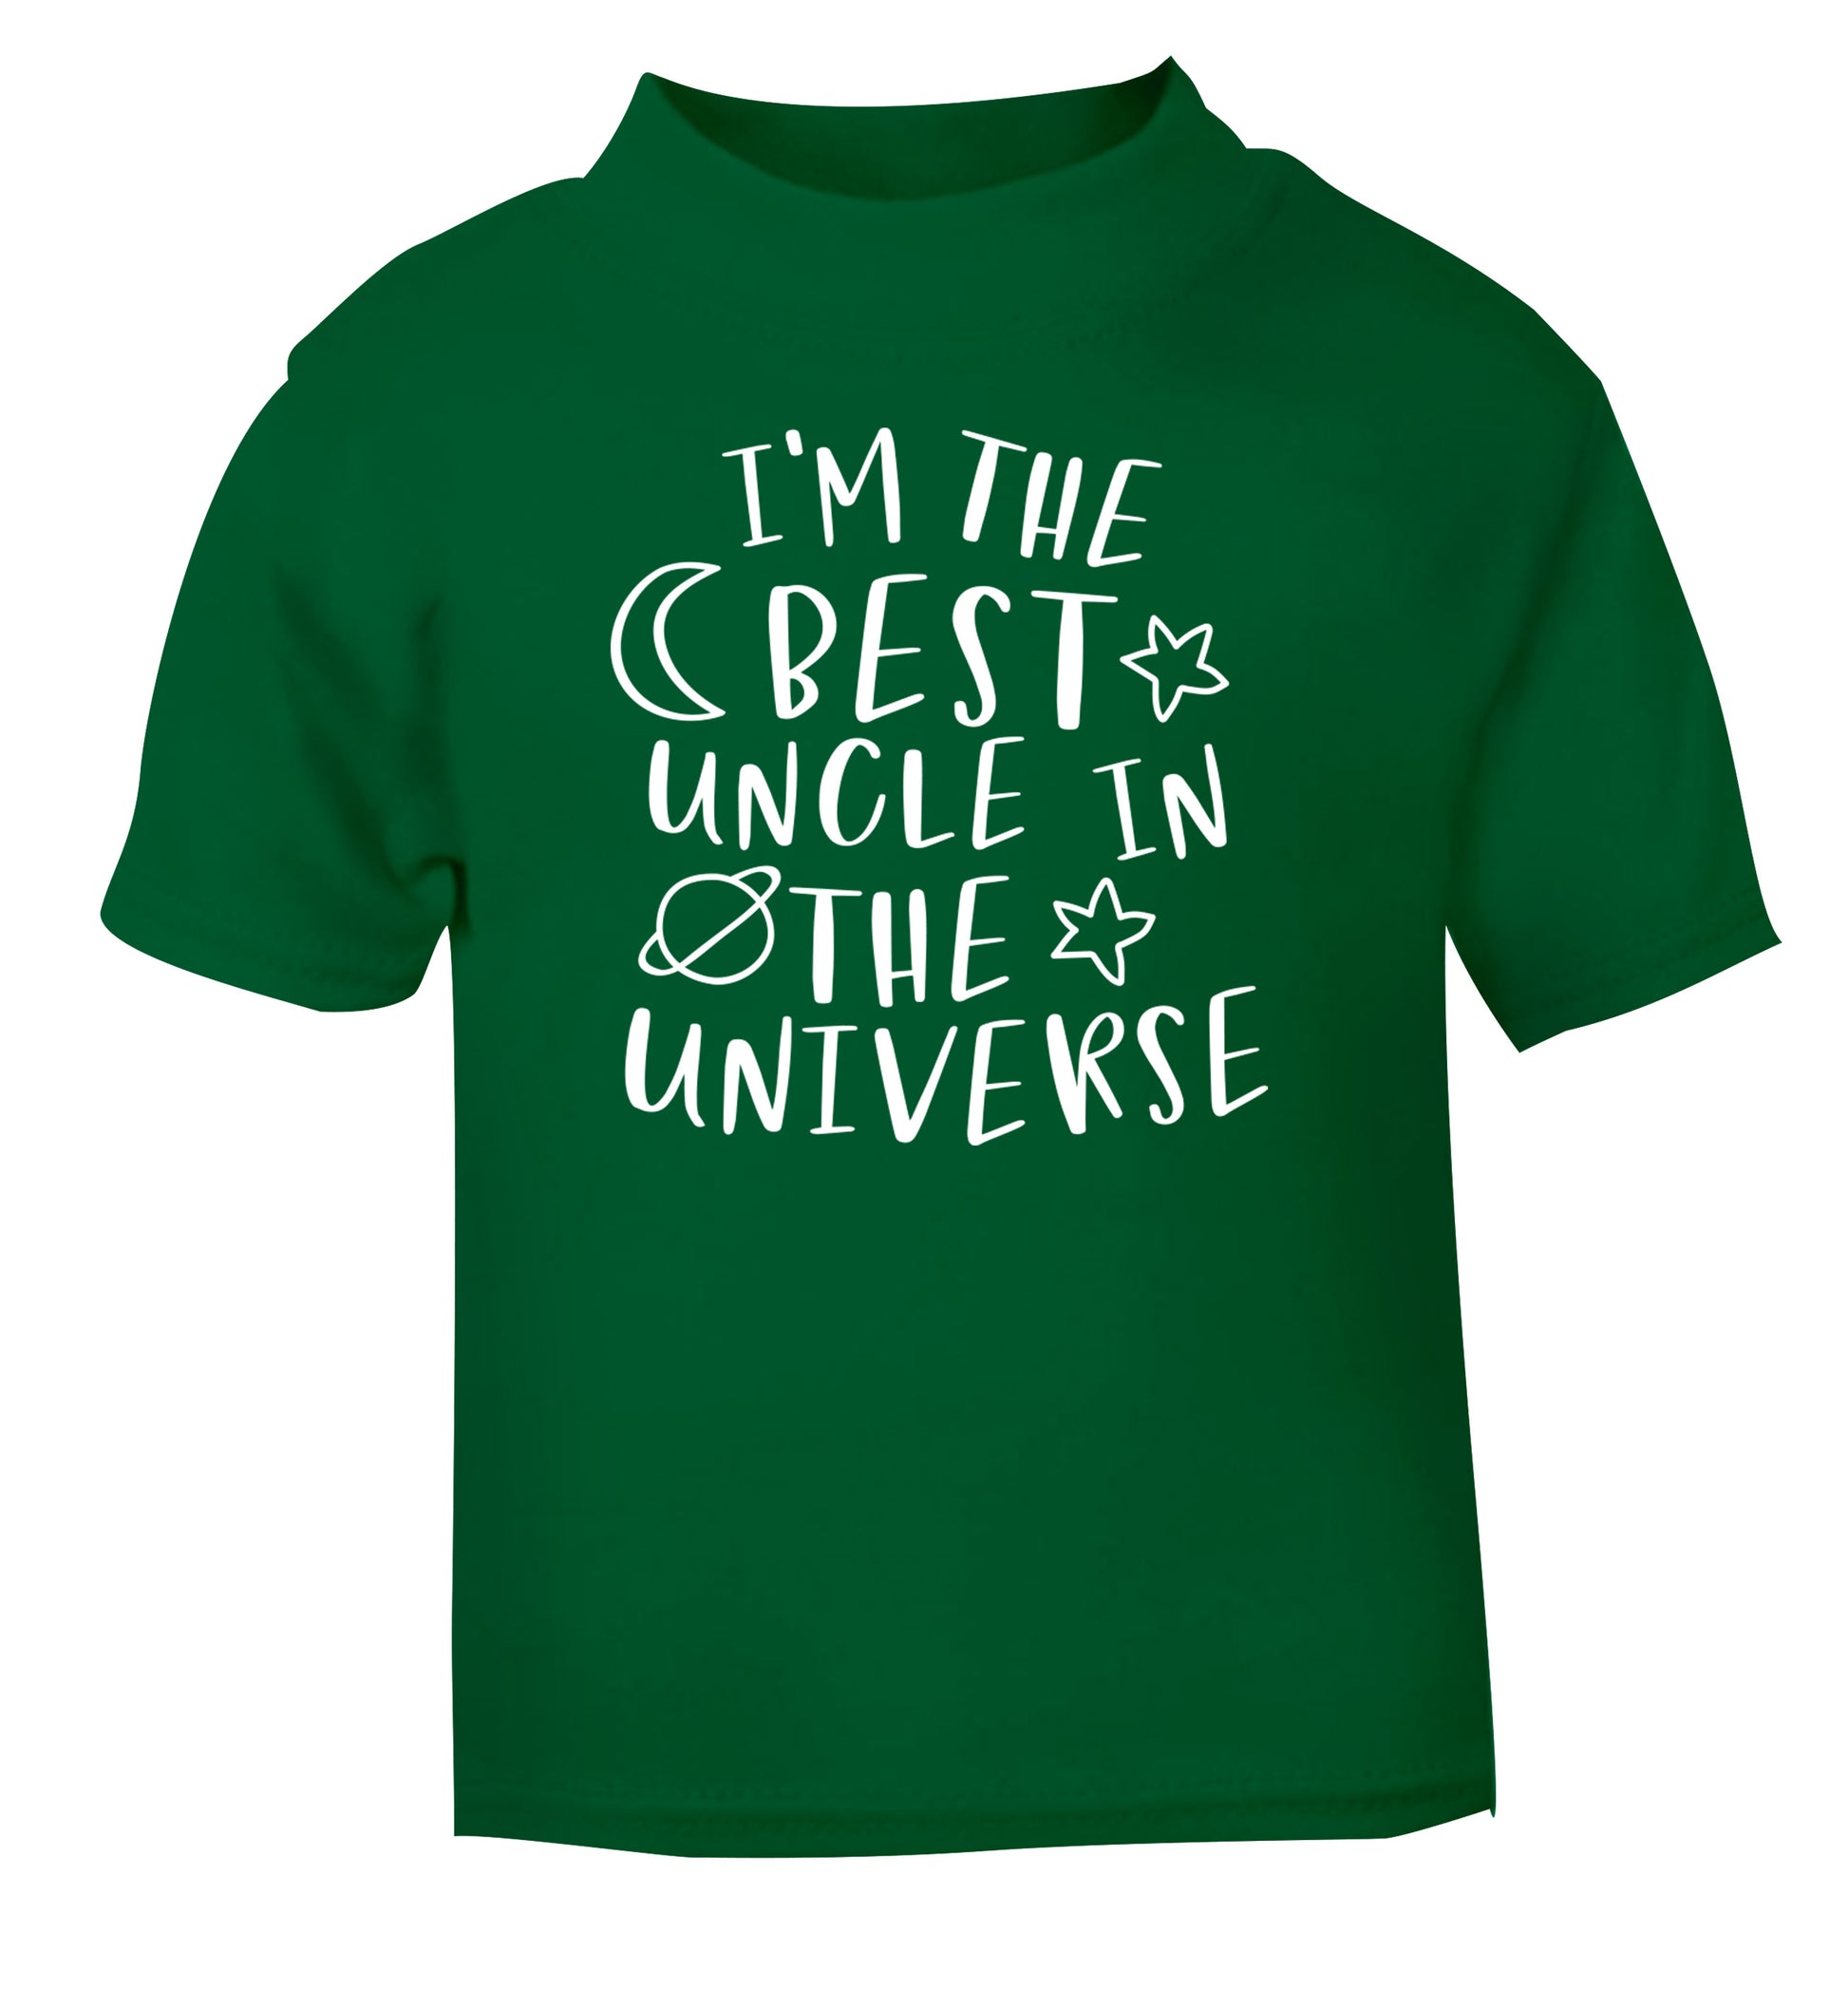 I'm the best uncle in the universe green Baby Toddler Tshirt 2 Years